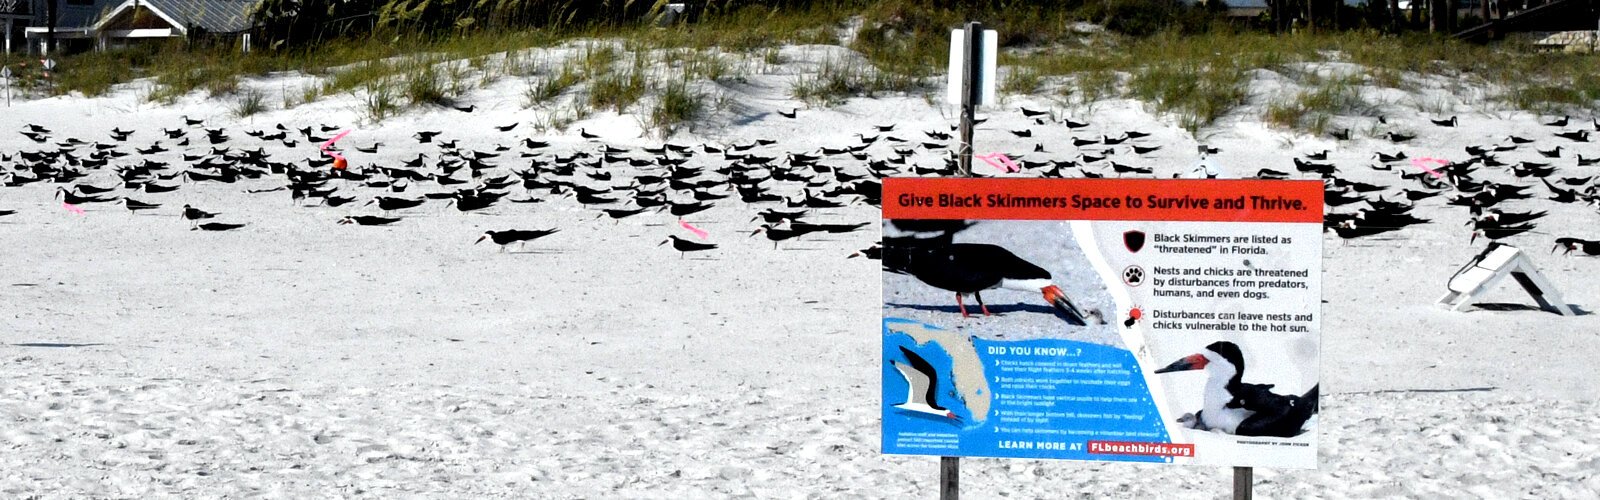 An educational sign in front of a black skimmer nesting colony informs the public about their state-threatened status and how to help them survive by giving them space and preventing human disturbances.